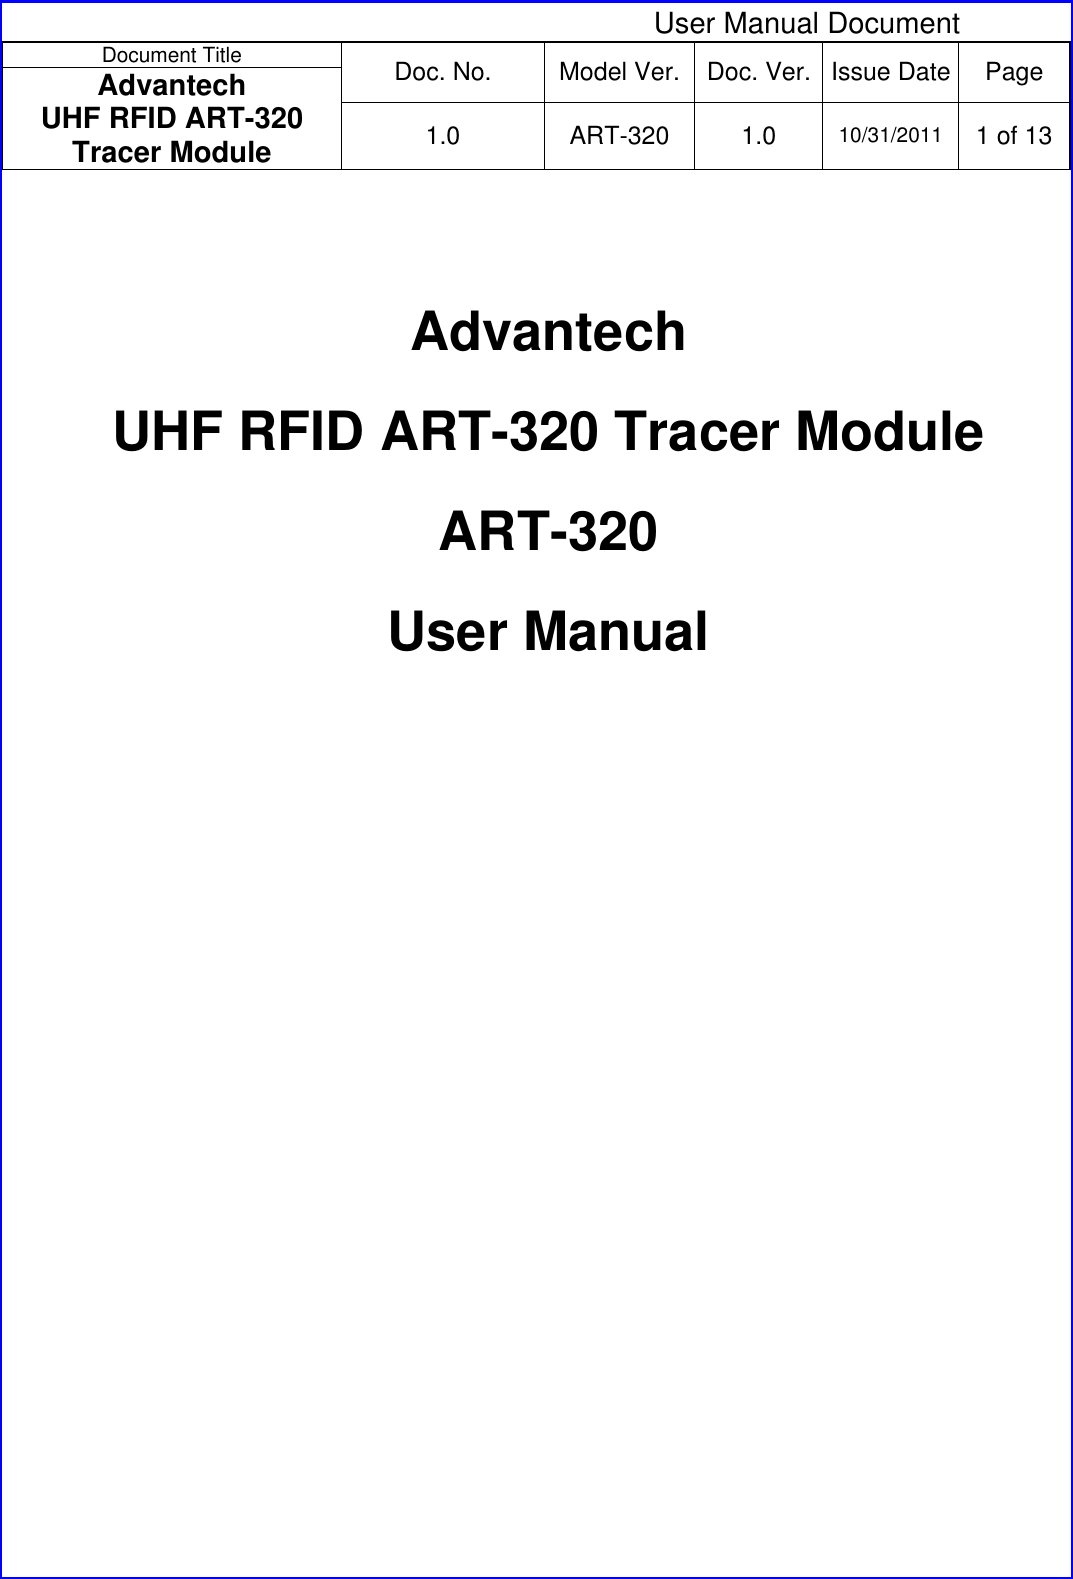  User Manual Document Document Title  Doc. No.  Model Ver. Doc. Ver.  Issue Date Page Advantech  UHF RFID ART-320 Tracer Module  1.0 ART-320 1.0 10/31/2011 1 of 13   Advantech  UHF RFID ART-320 Tracer Module ART-320 User Manual   